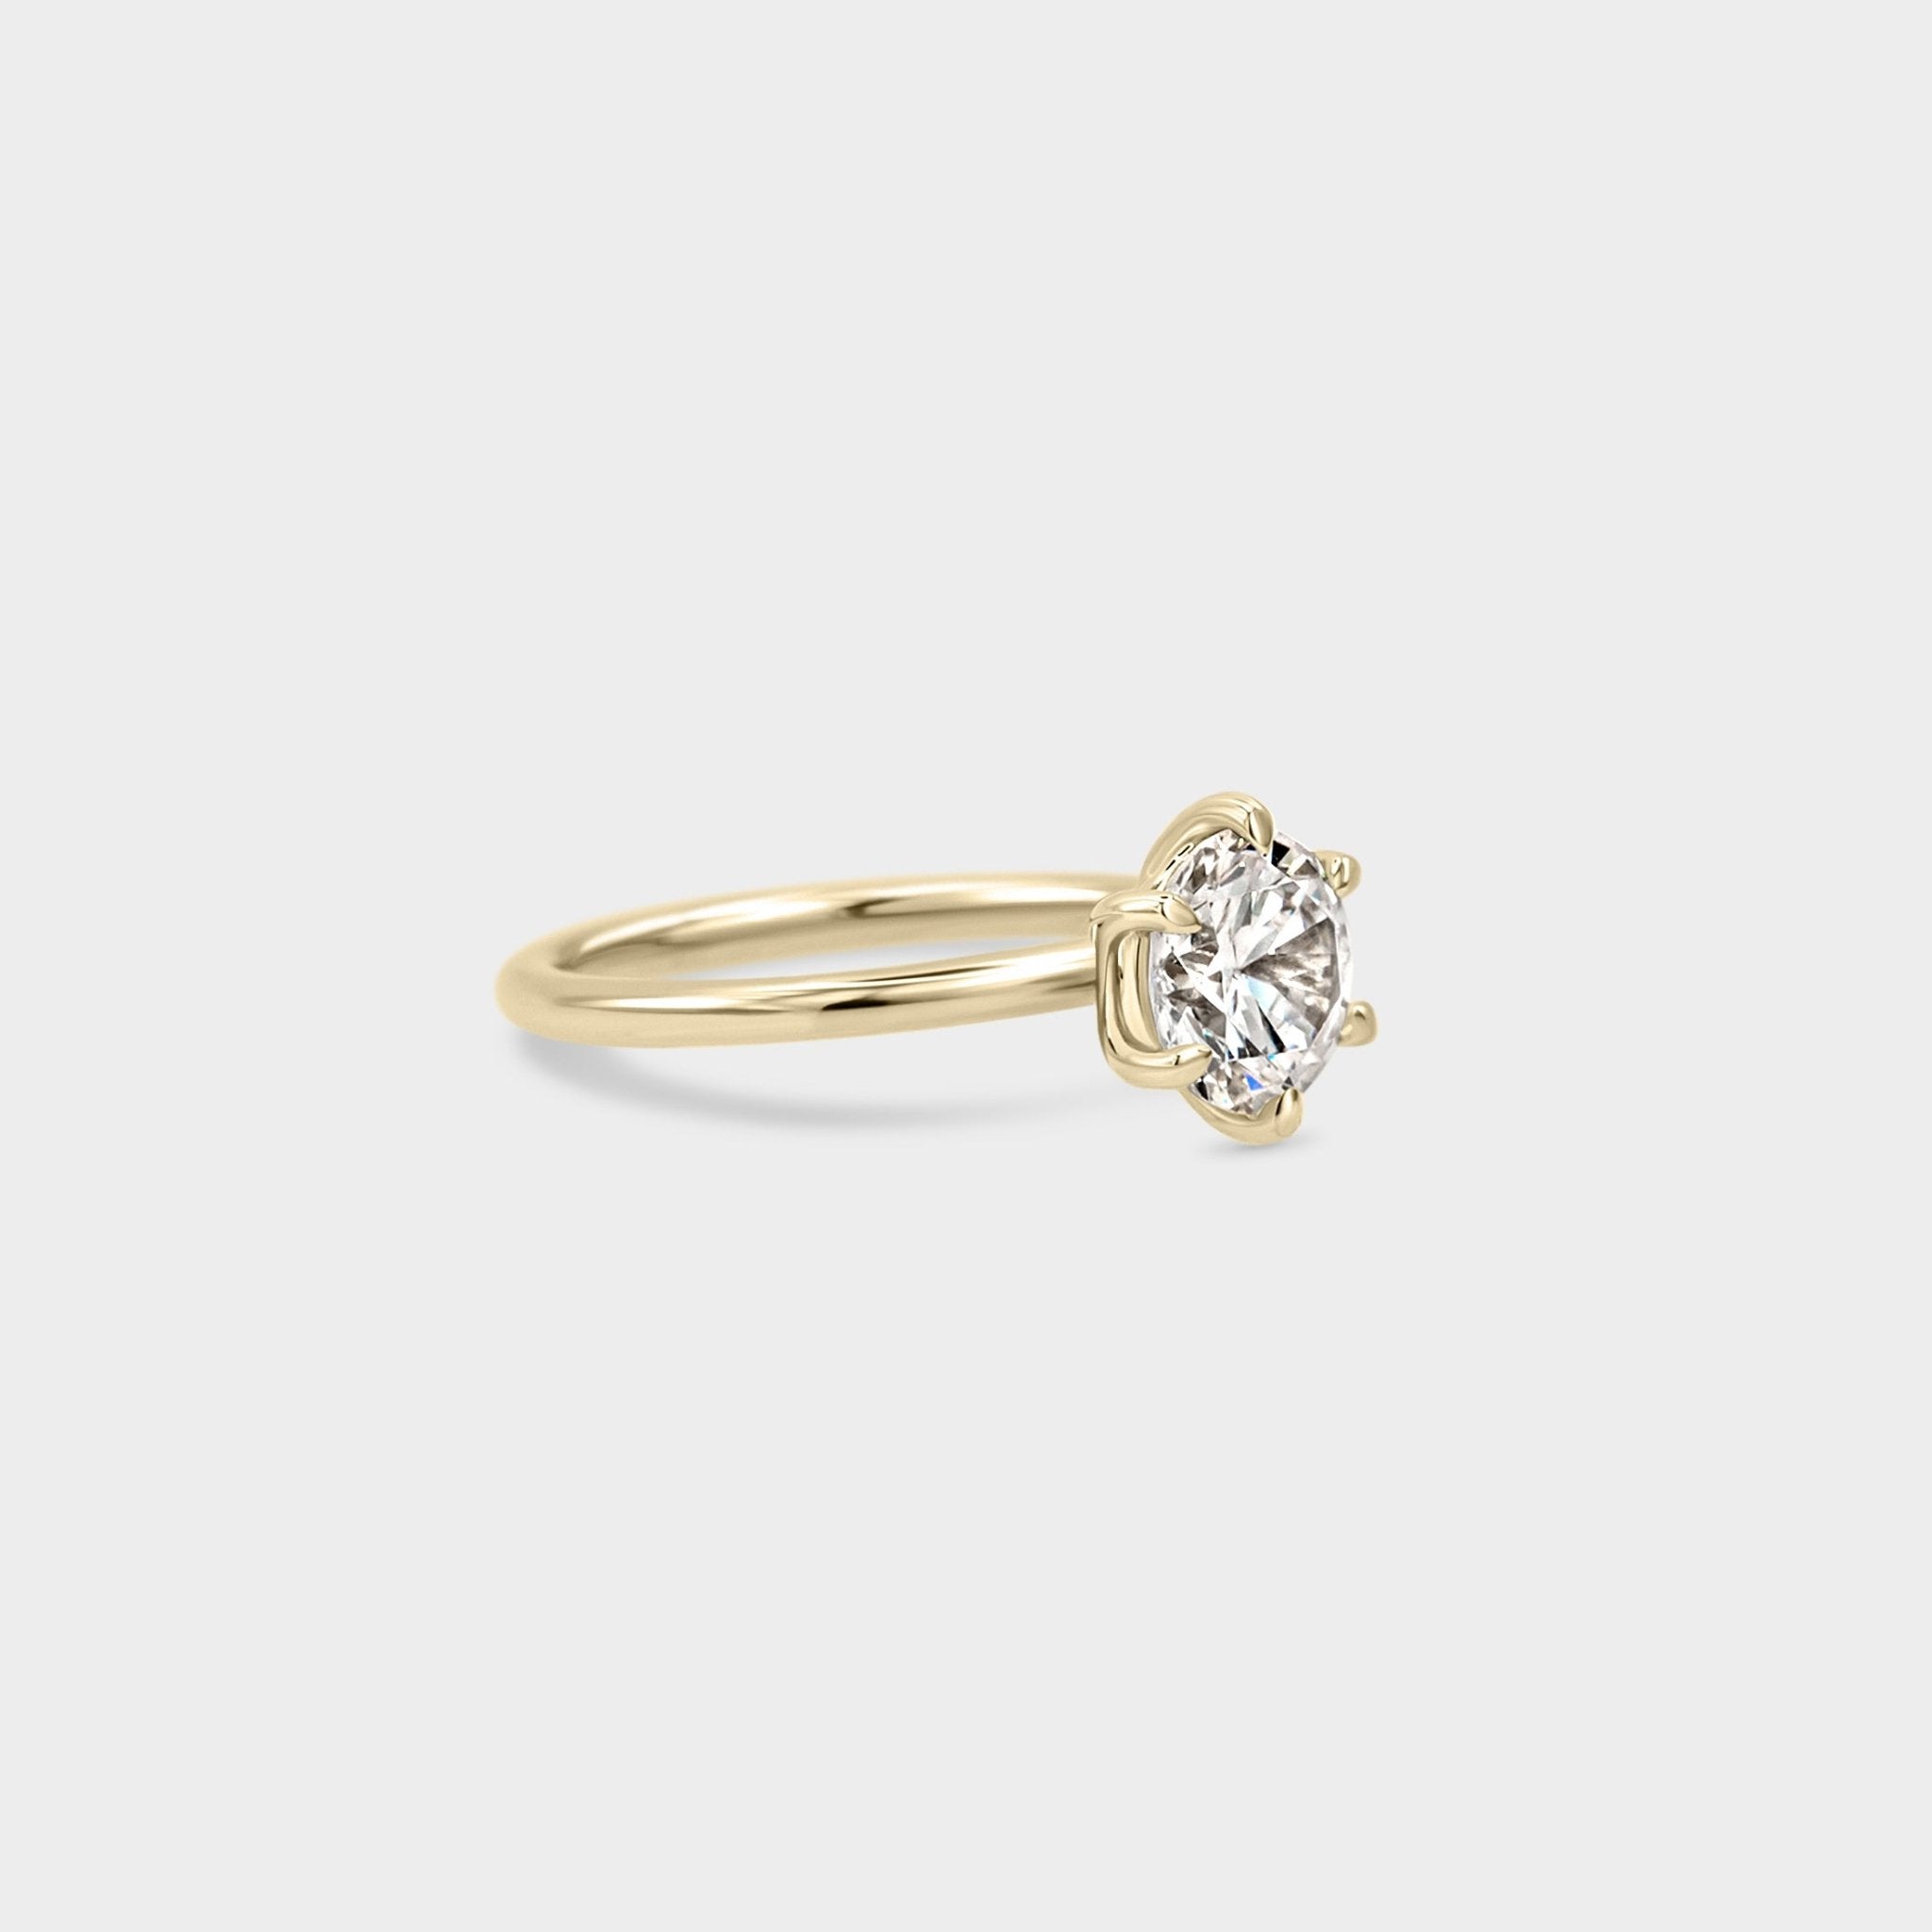 Solitaire of Round LAB GROWN Diamond - Laher -